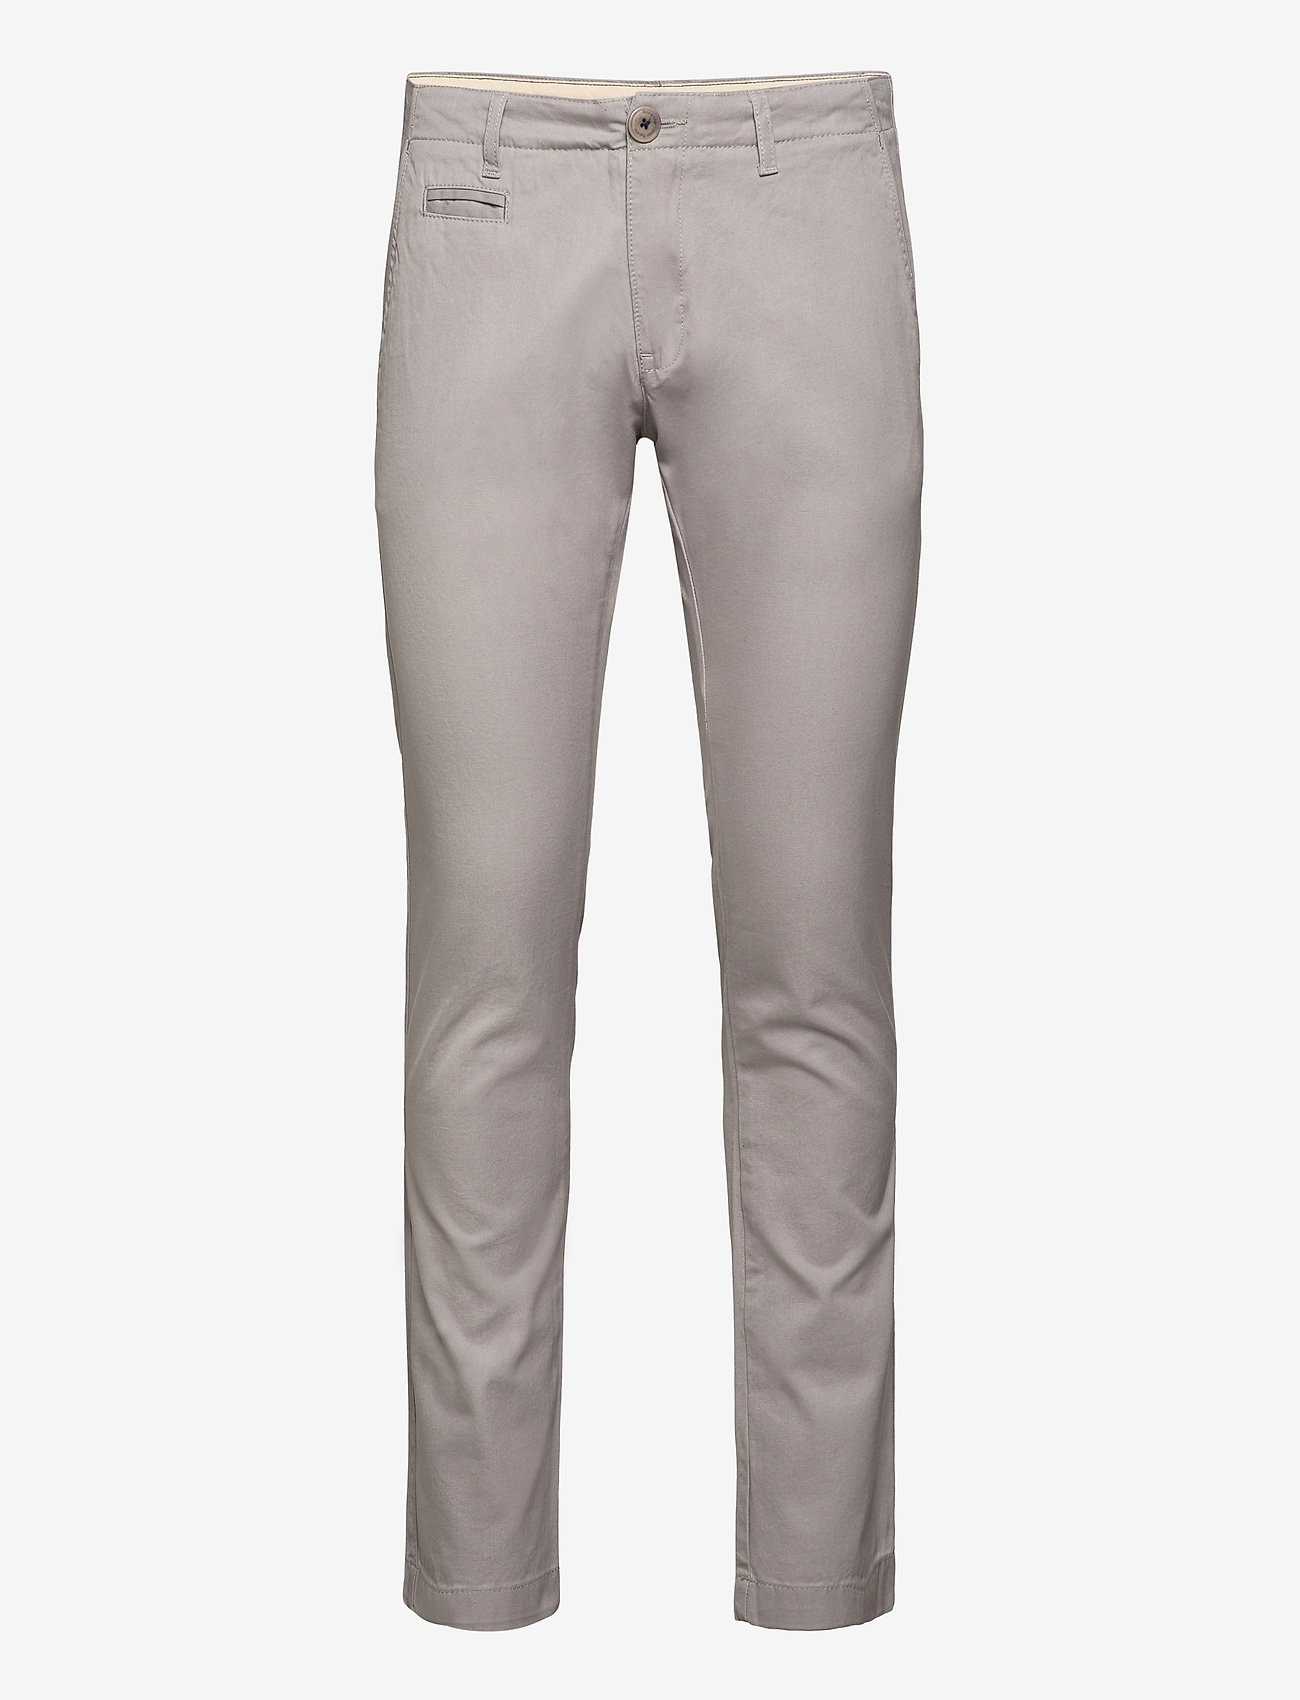 Knowledge Cotton Apparel - Twisted Twill Chinos - alloy - 0